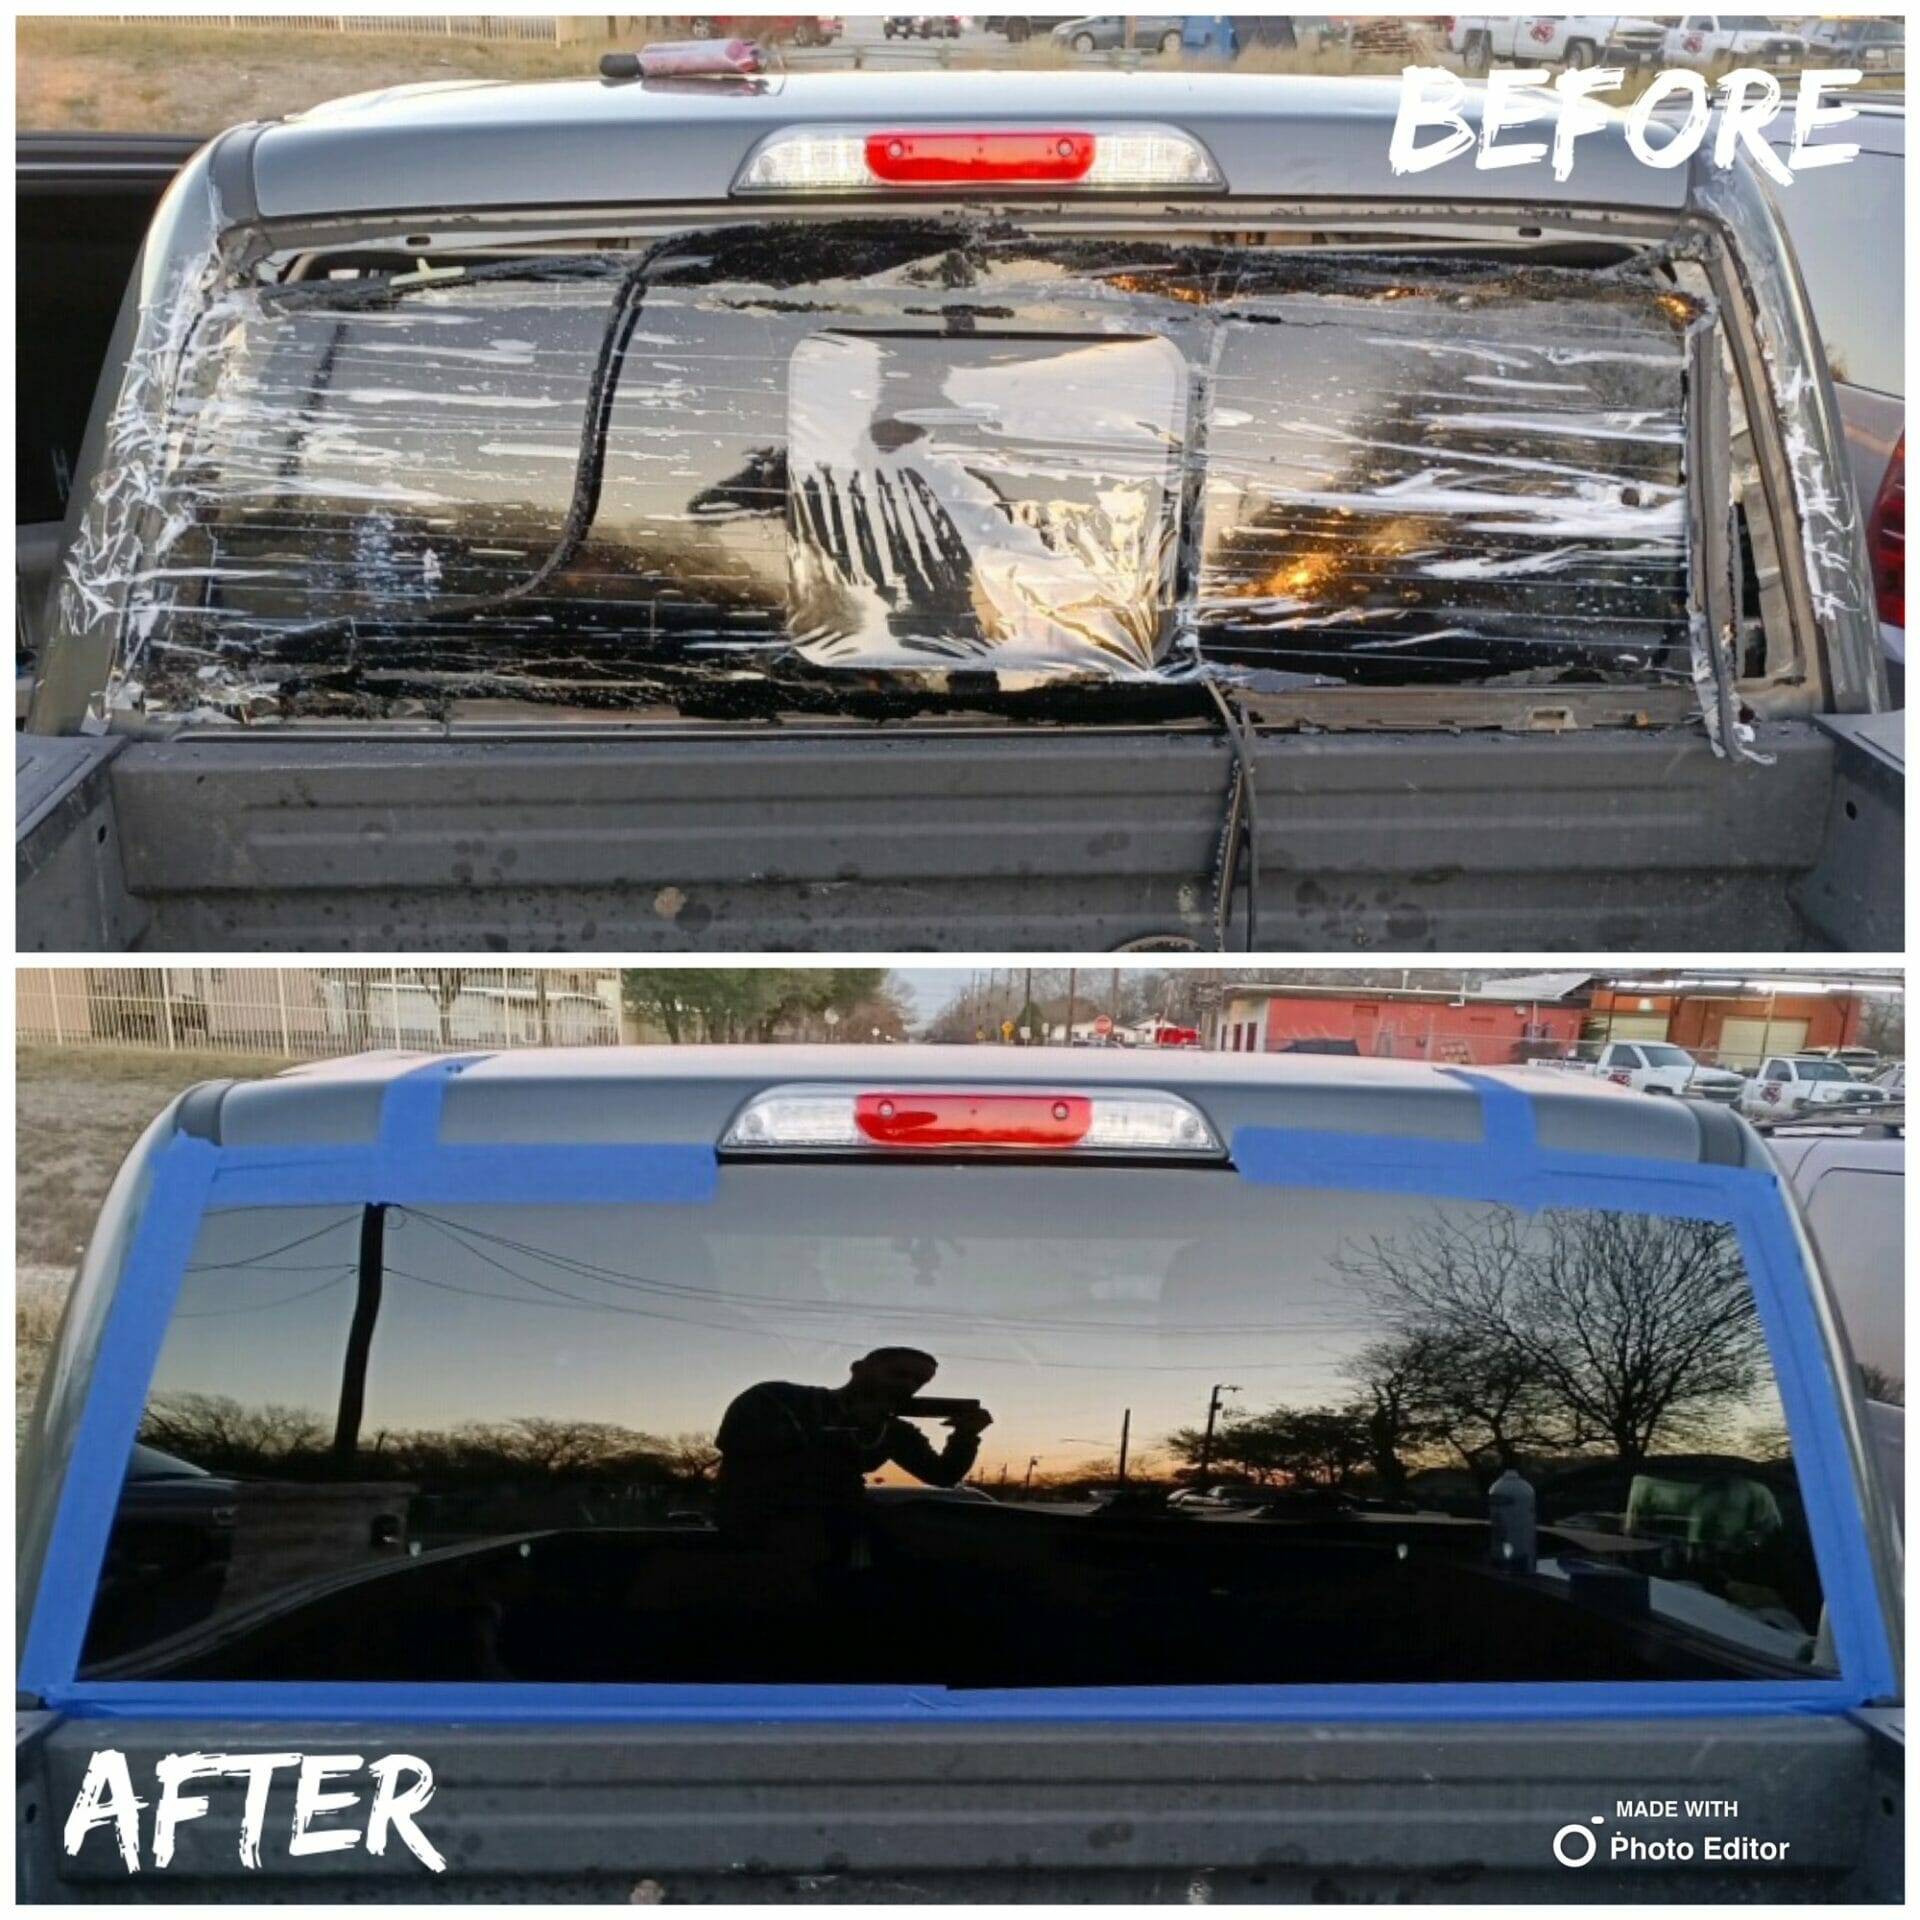 This before and after image highlights the successful repair of a pickup truck's rear windshield in Alamo Heights, Texas. The top half features the damaged glass, smashed due to vandalism. The bottom half presents the truck after the repair, fitted with a new, clear, and intact 1-piece stationary back glass, emphasizing the quality and effectiveness of our windshield replacement service in the Alamo Heights area.